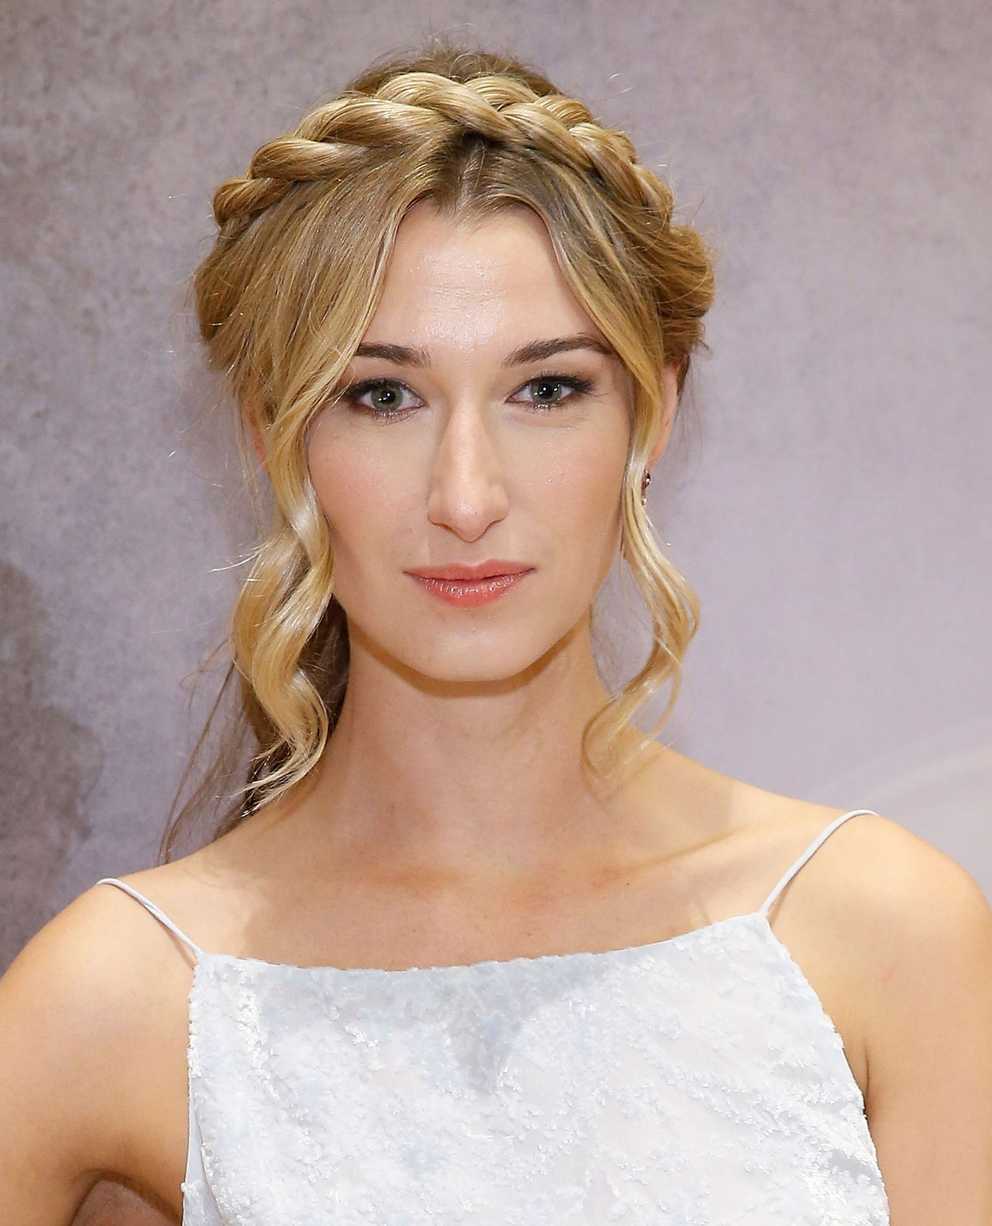 Halo Braid With Long Tendrils – Goodhousekeeping In 2019 With Regard To Most Current Halo Braid Hairstyles With Long Tendrils (Gallery 1 of 20)